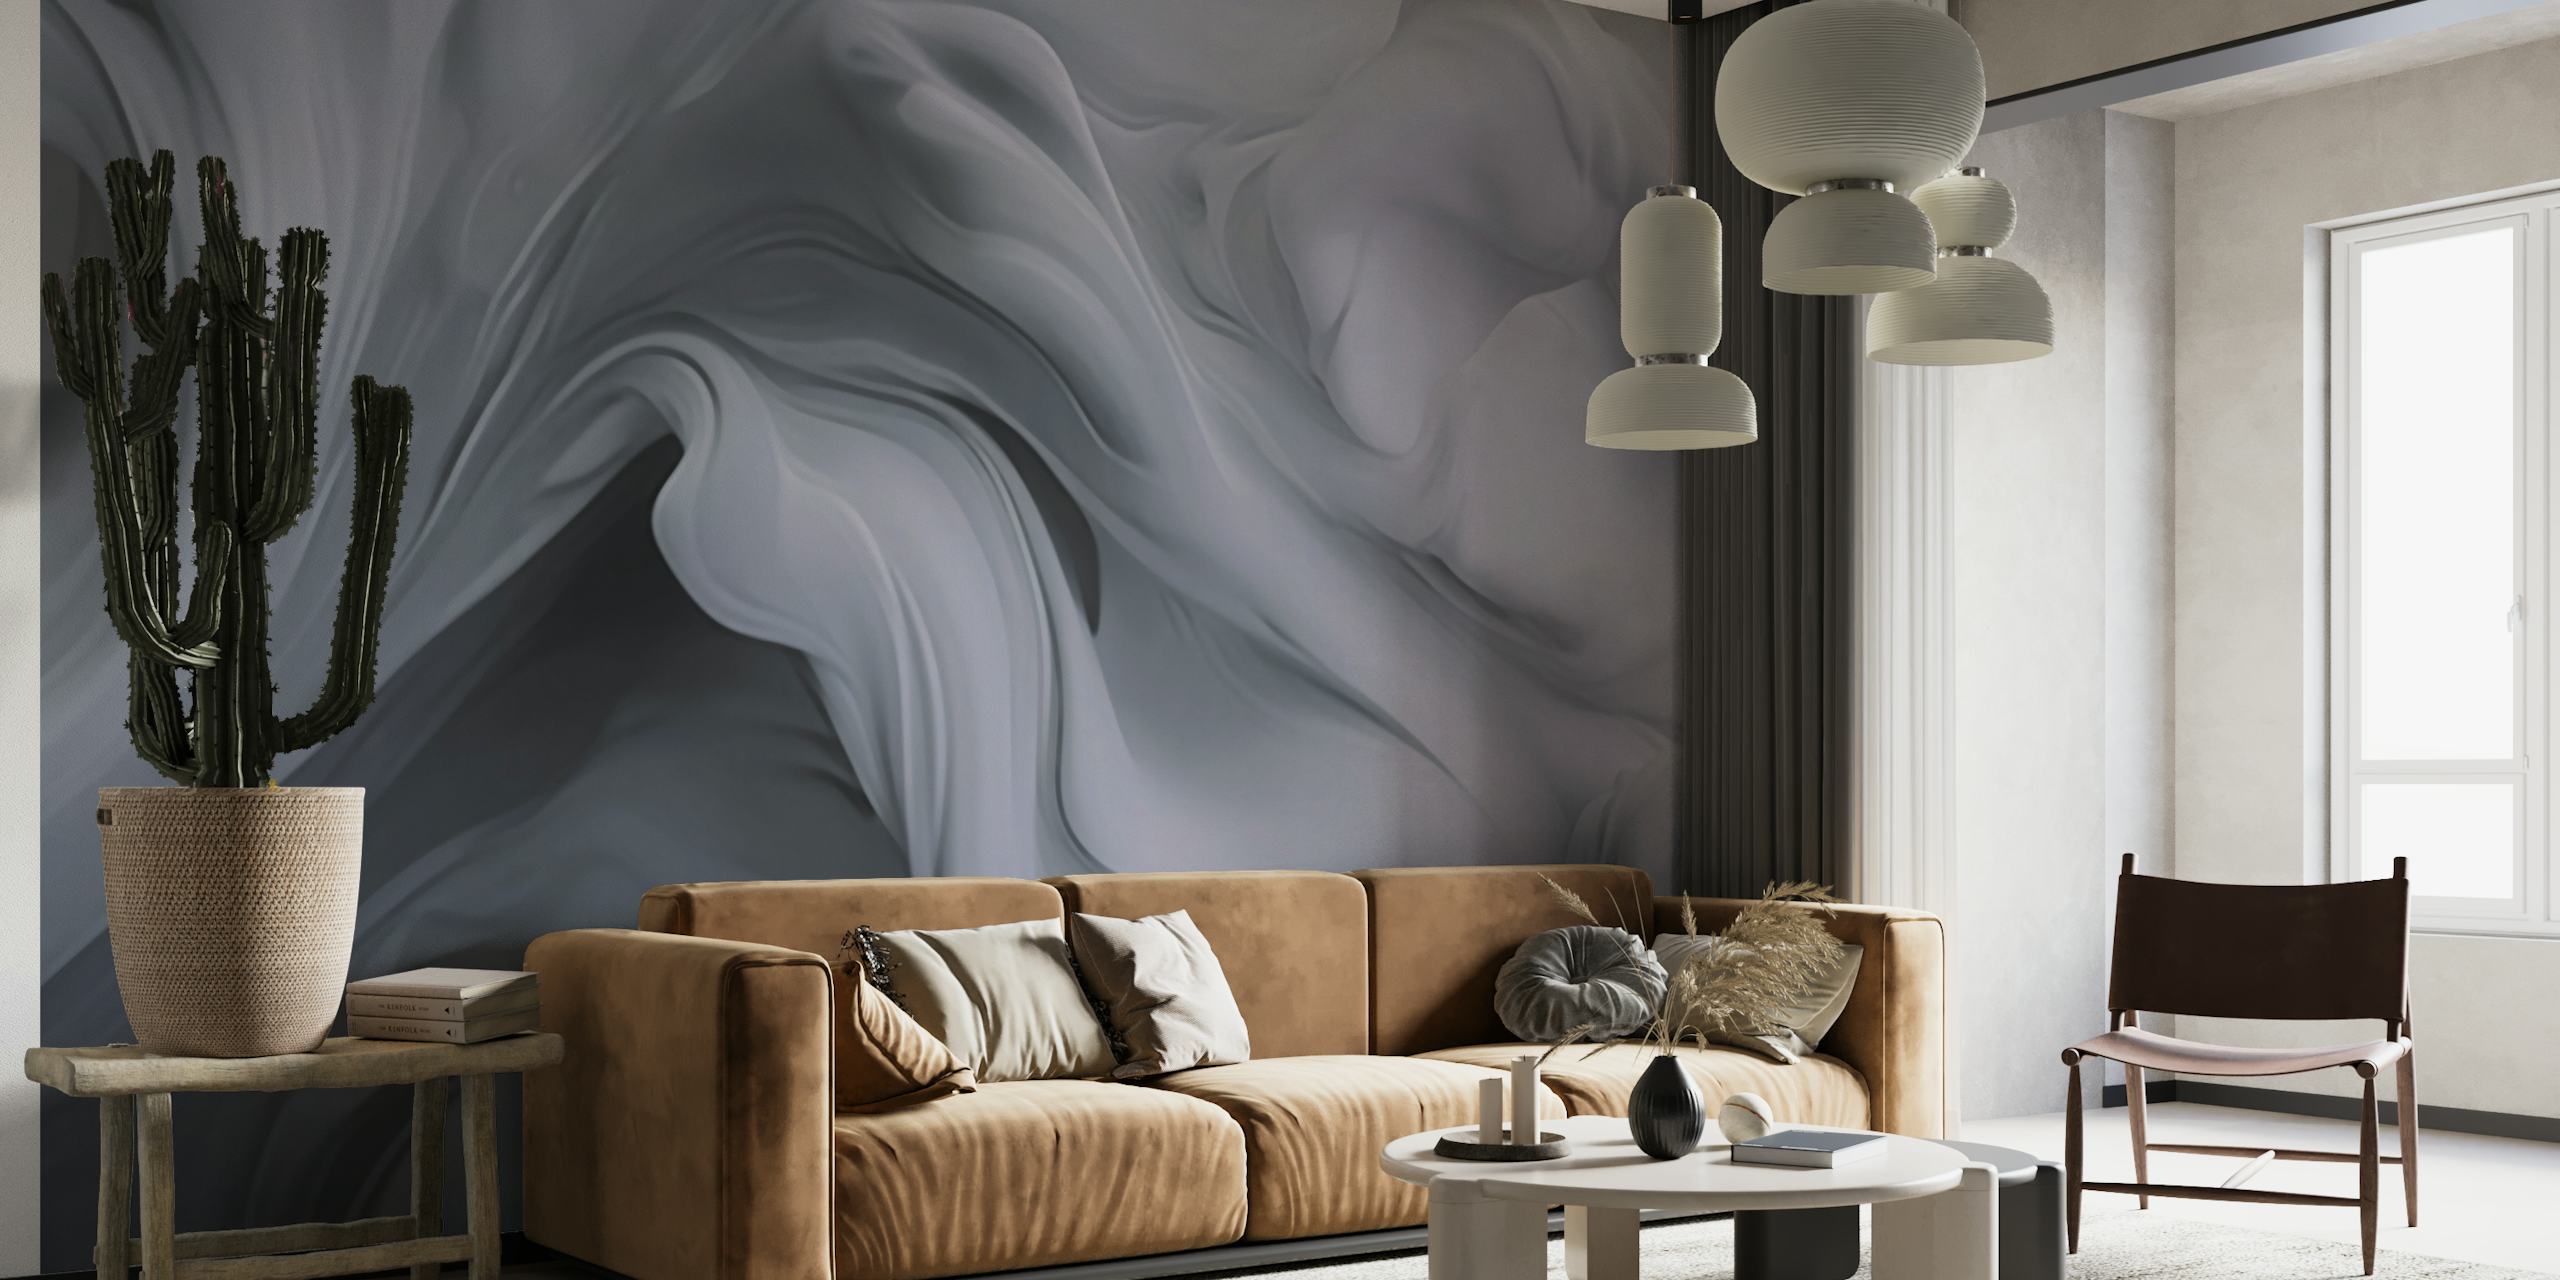 Ethereal Fluid Dreams In Shades Of Grey wallpaper